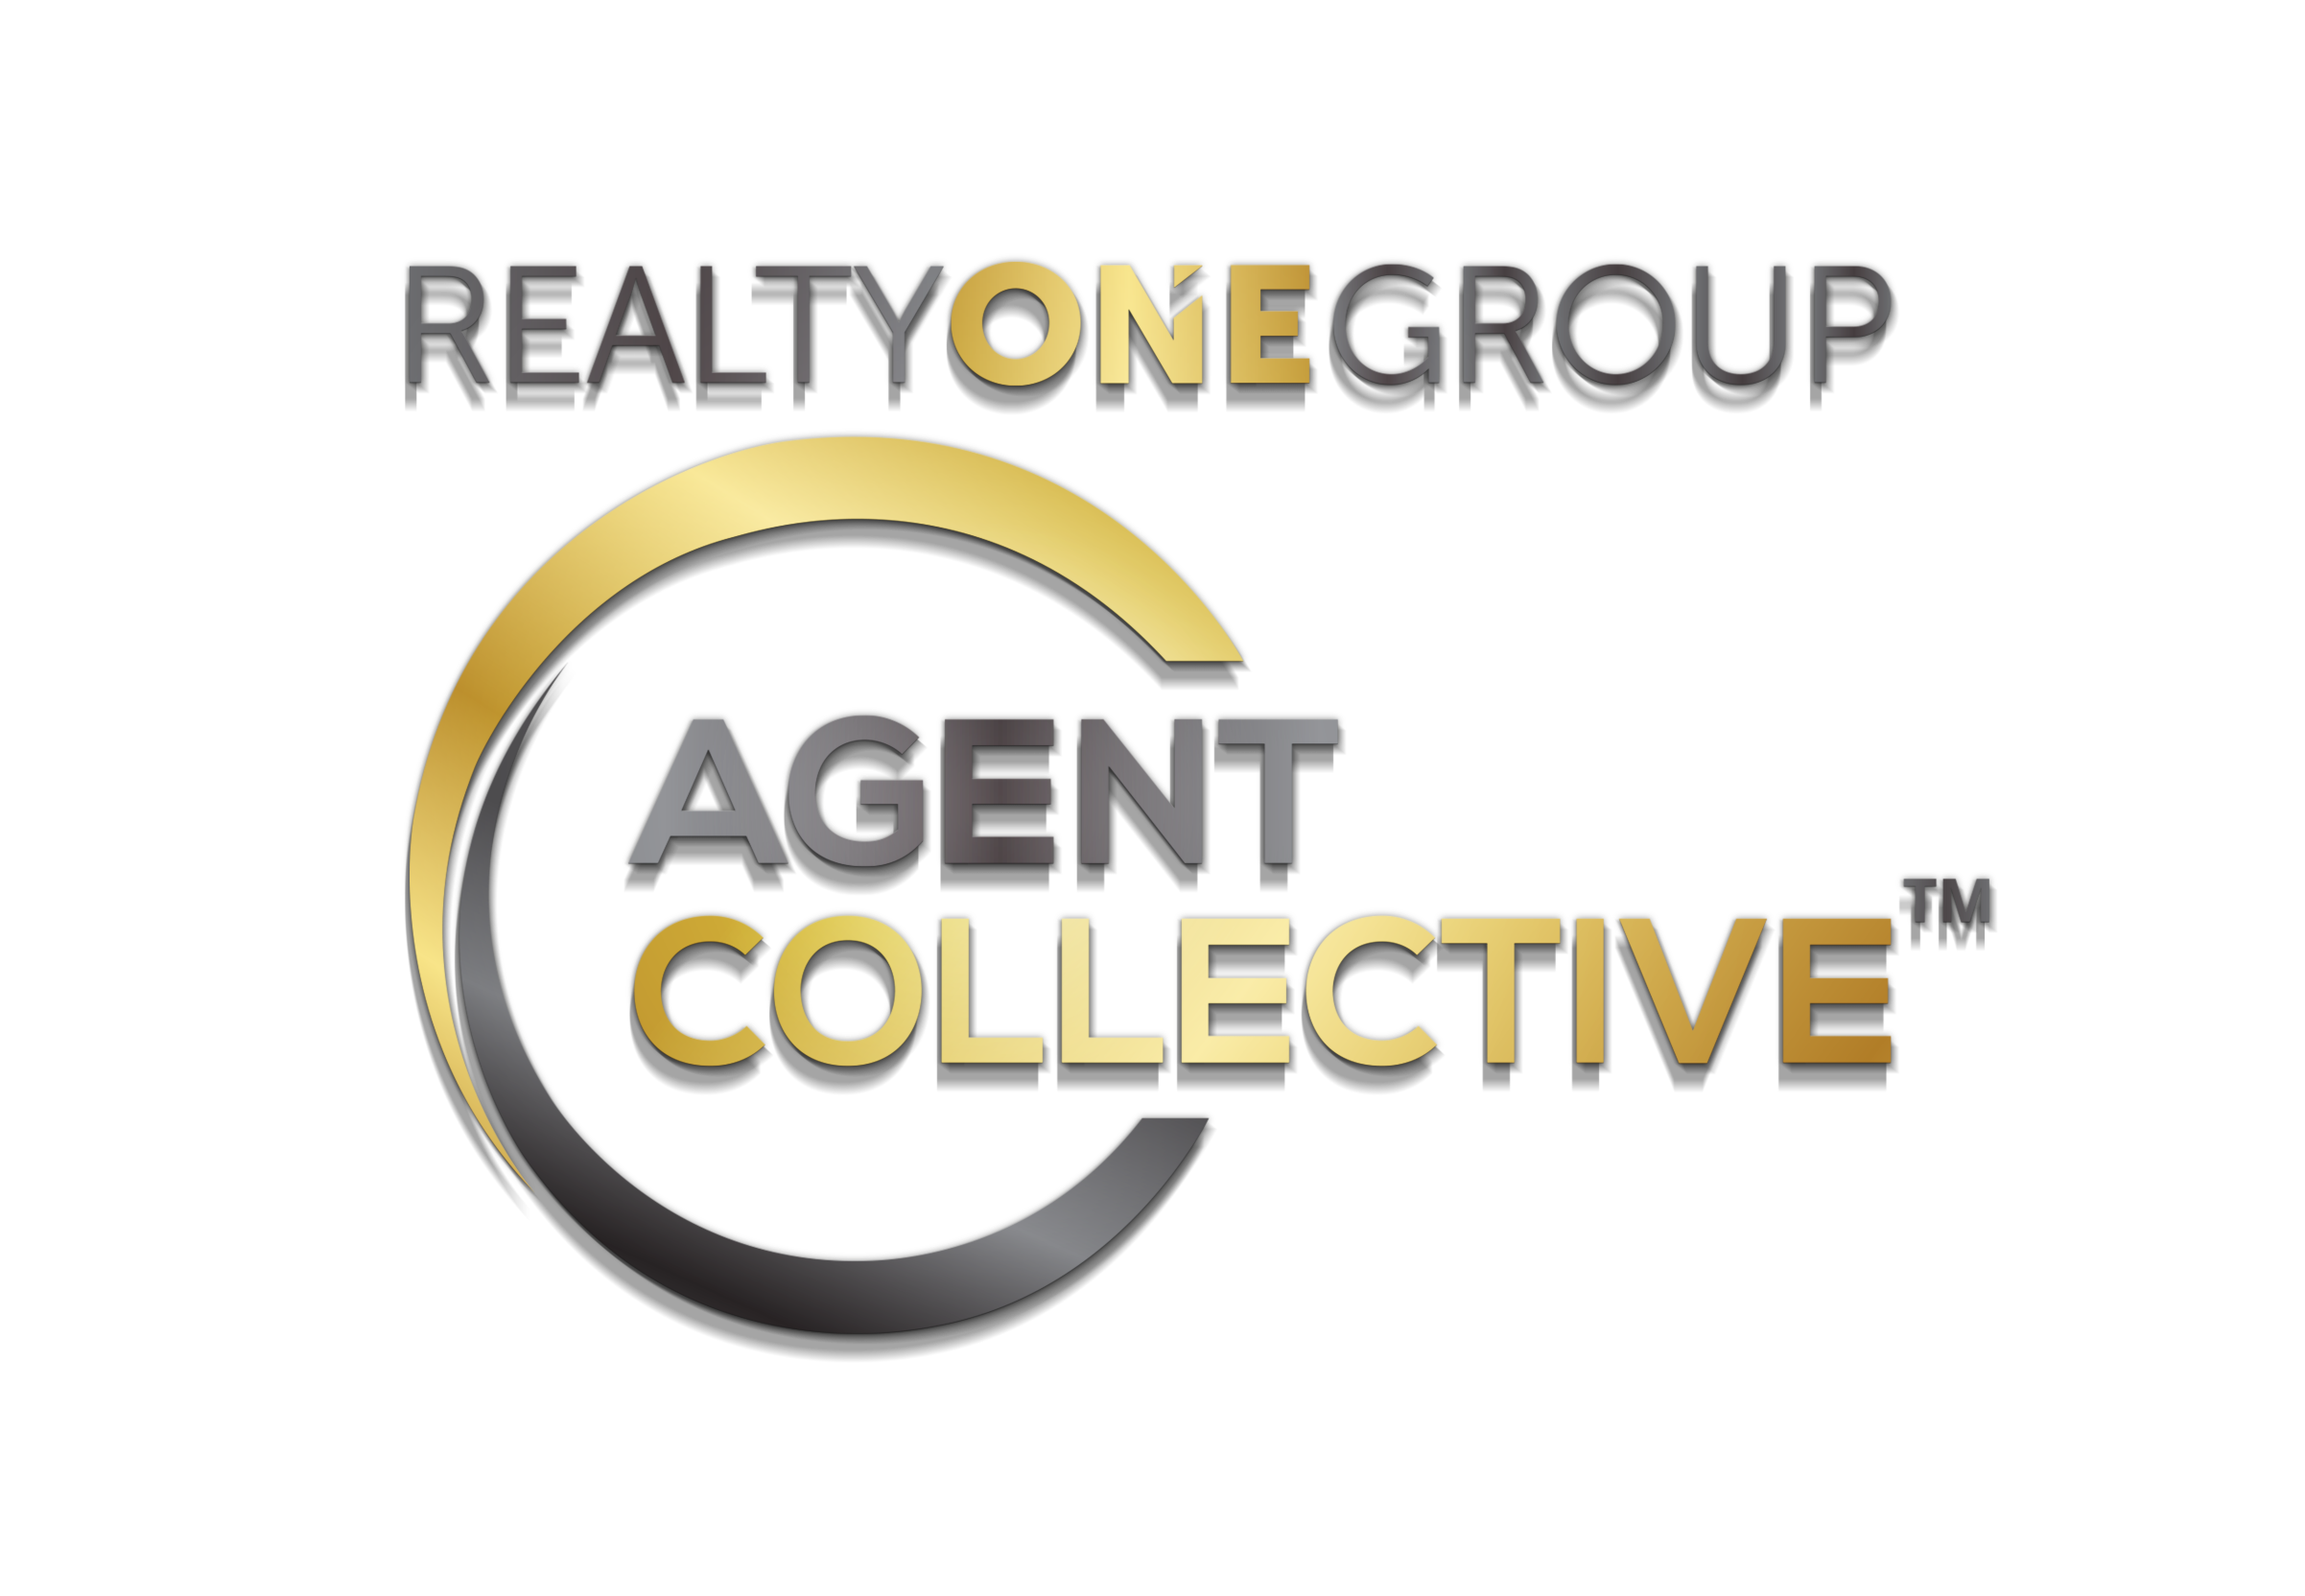 Agent Collective With Realty One (Black) Reduced Size